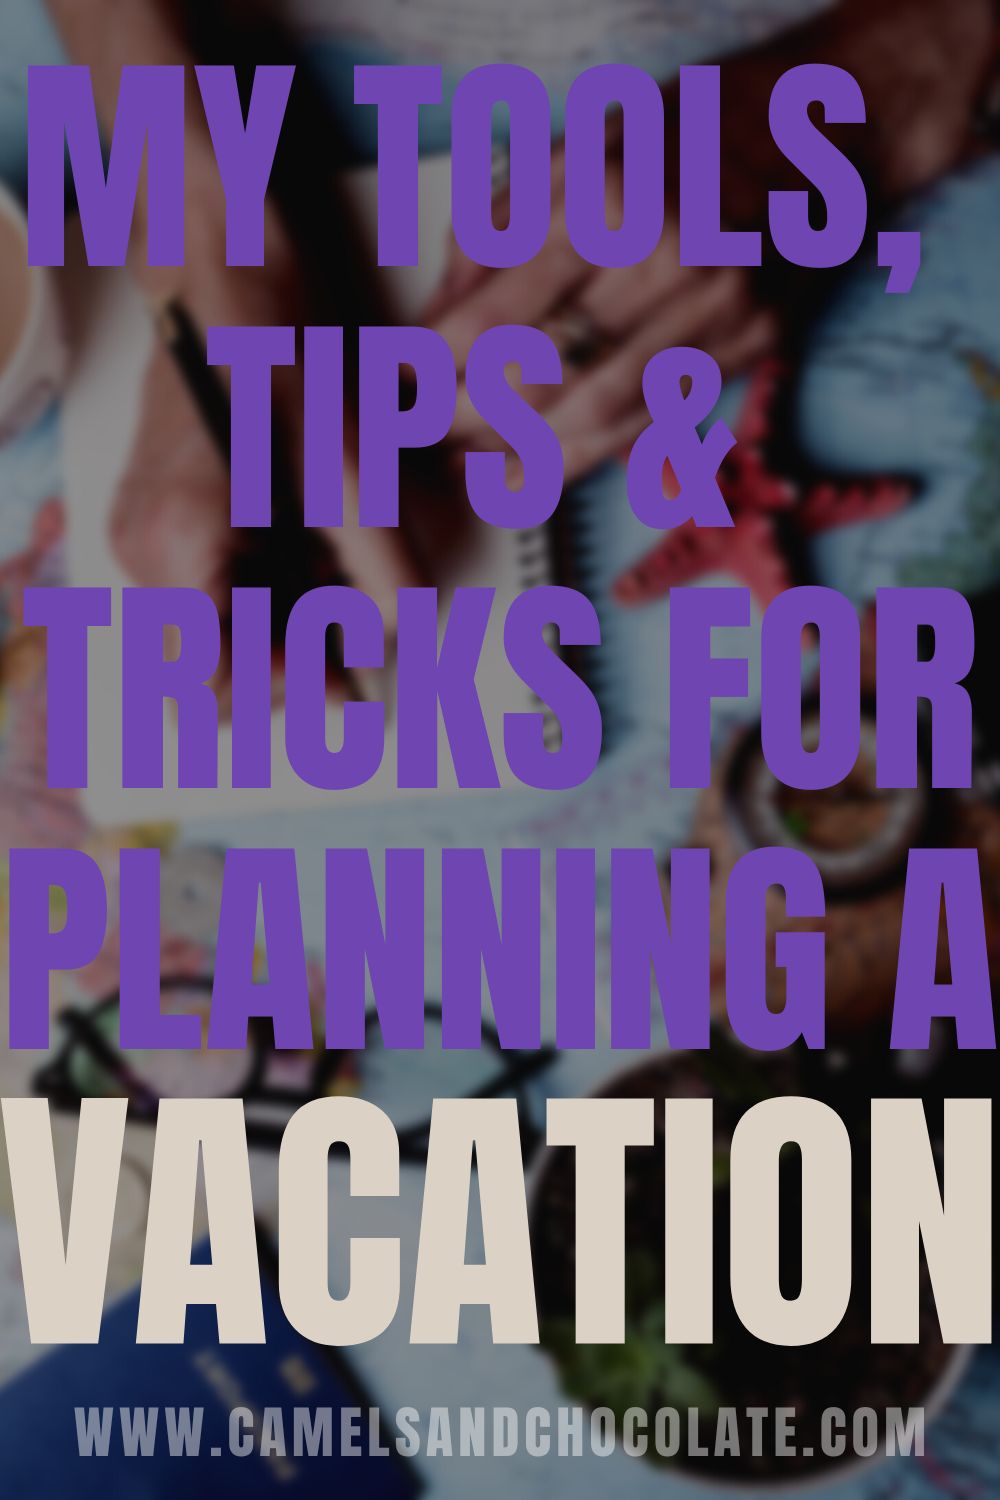 Best Websites, Tools and Tricks for Trip Planning